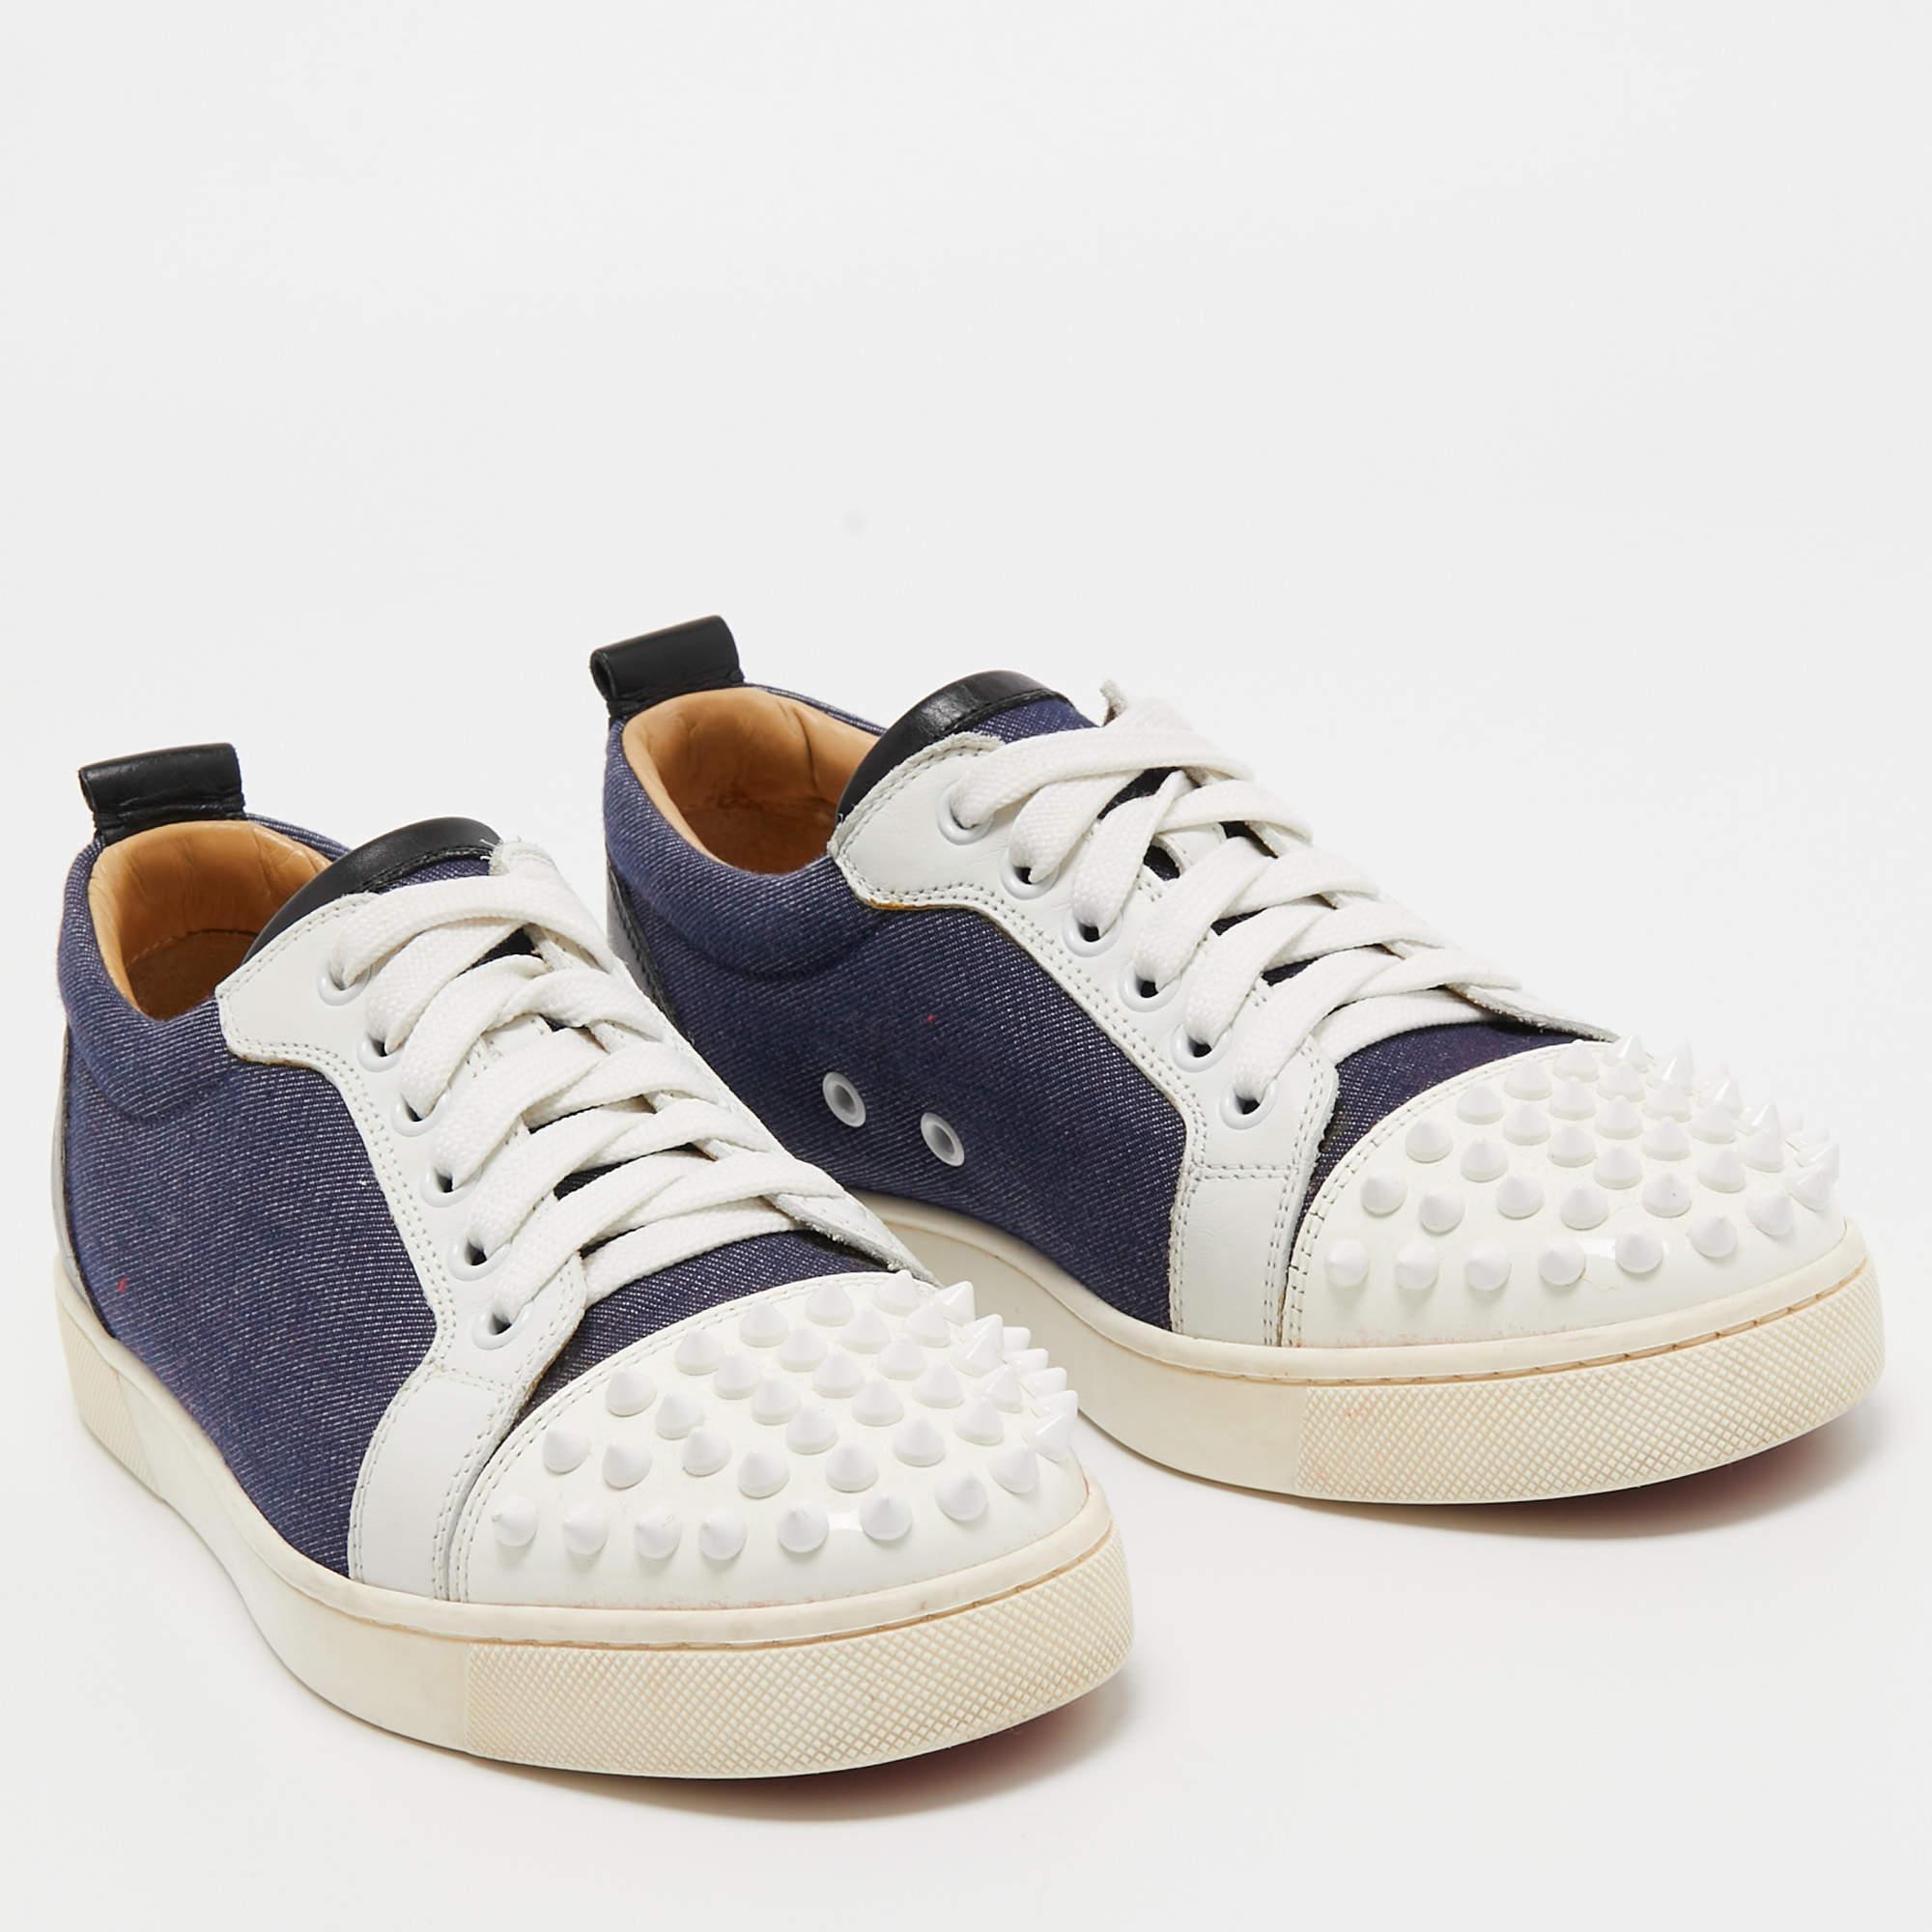 Christian Louboutin Blue/White Denim and Leather Spikes Low Top Sneakers Size 37 For Sale 2